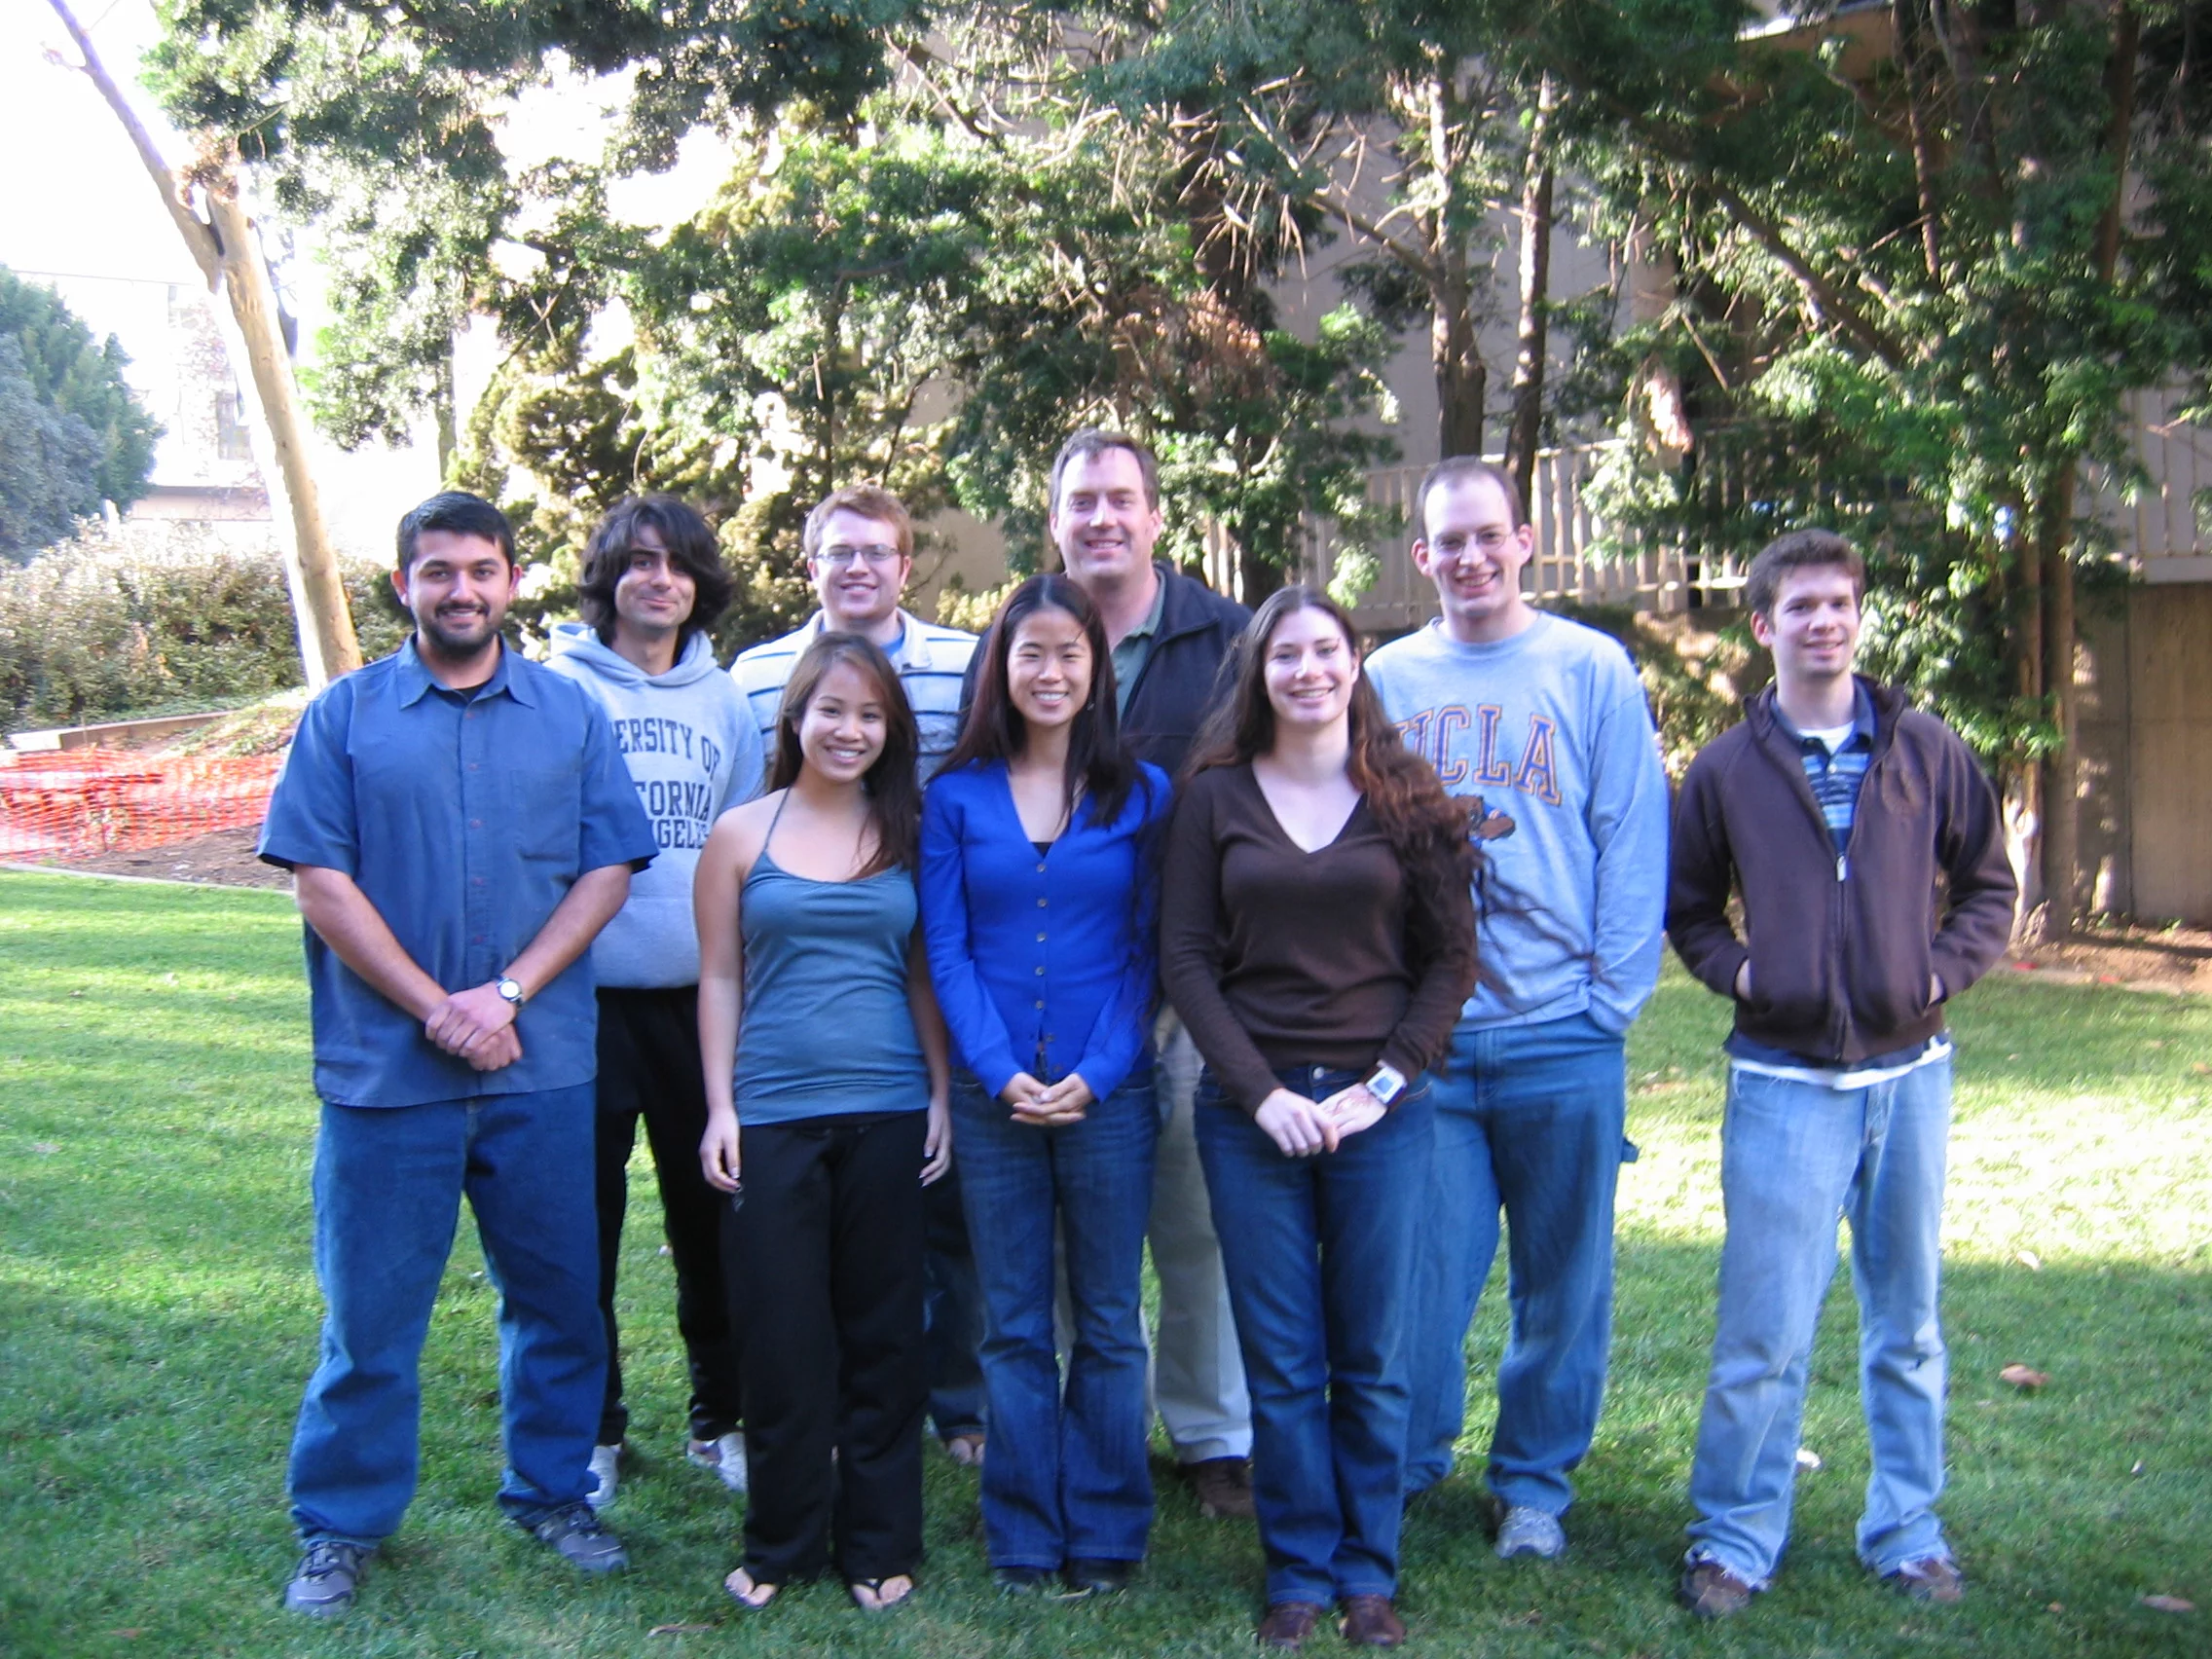 The first every Bradley Lab group photo, taken outside of Boyer Hall.